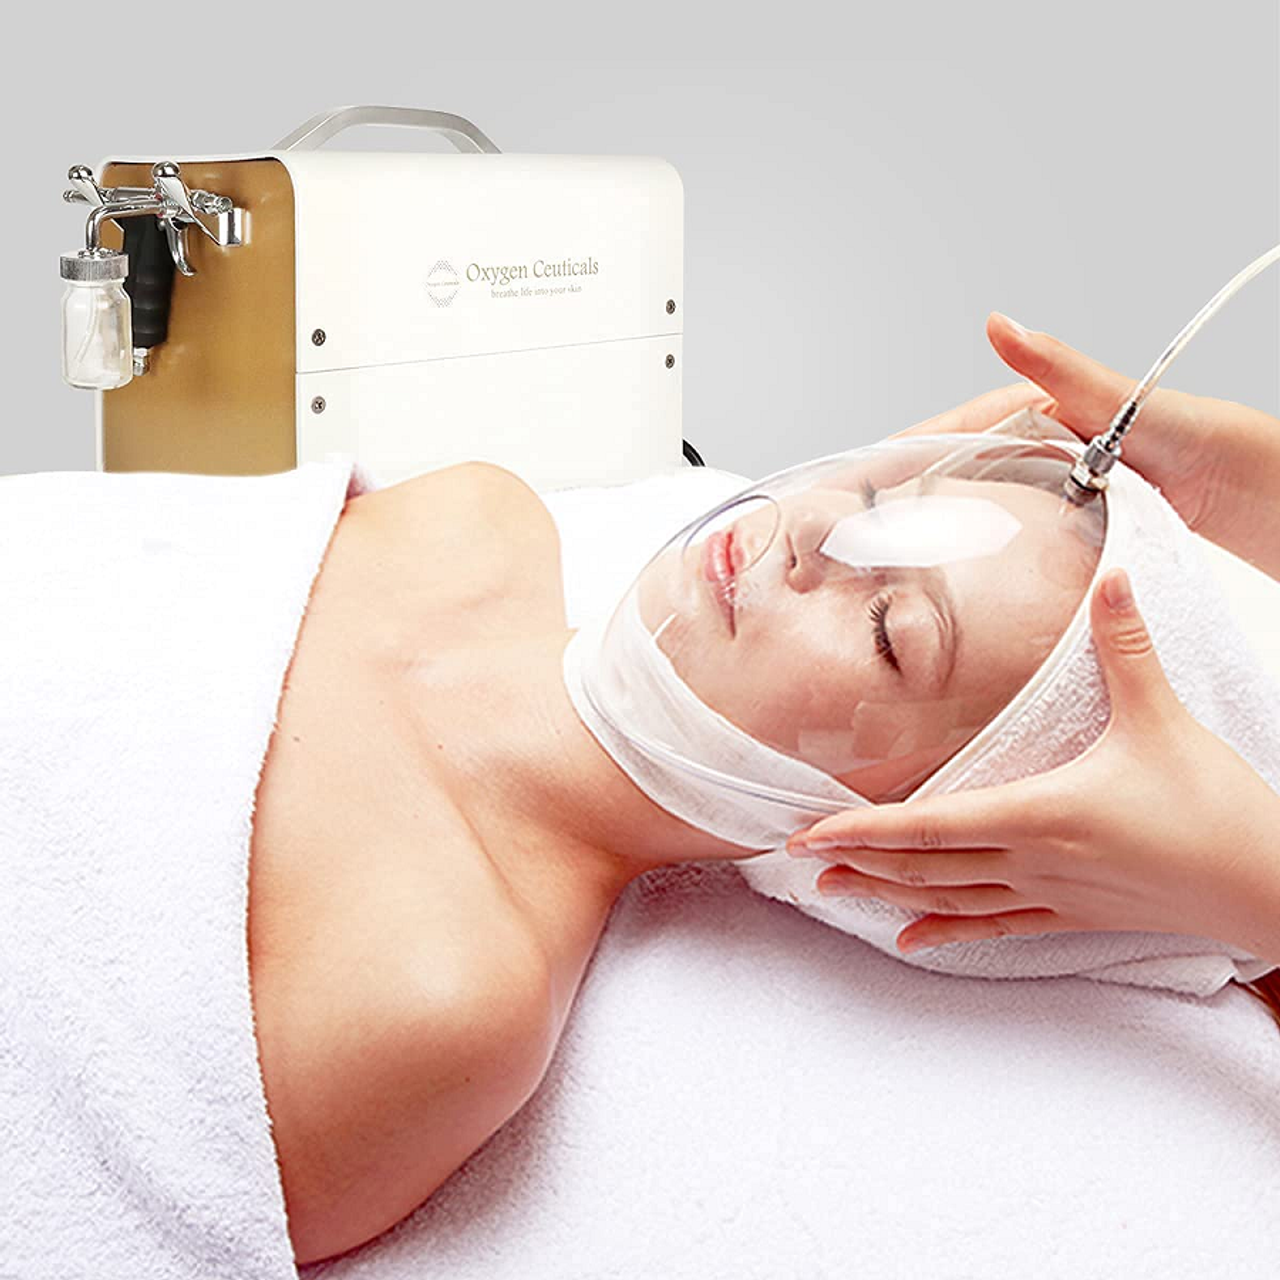 OxygenCeuticals Glass Skin Dome Facial Sex Image Hq